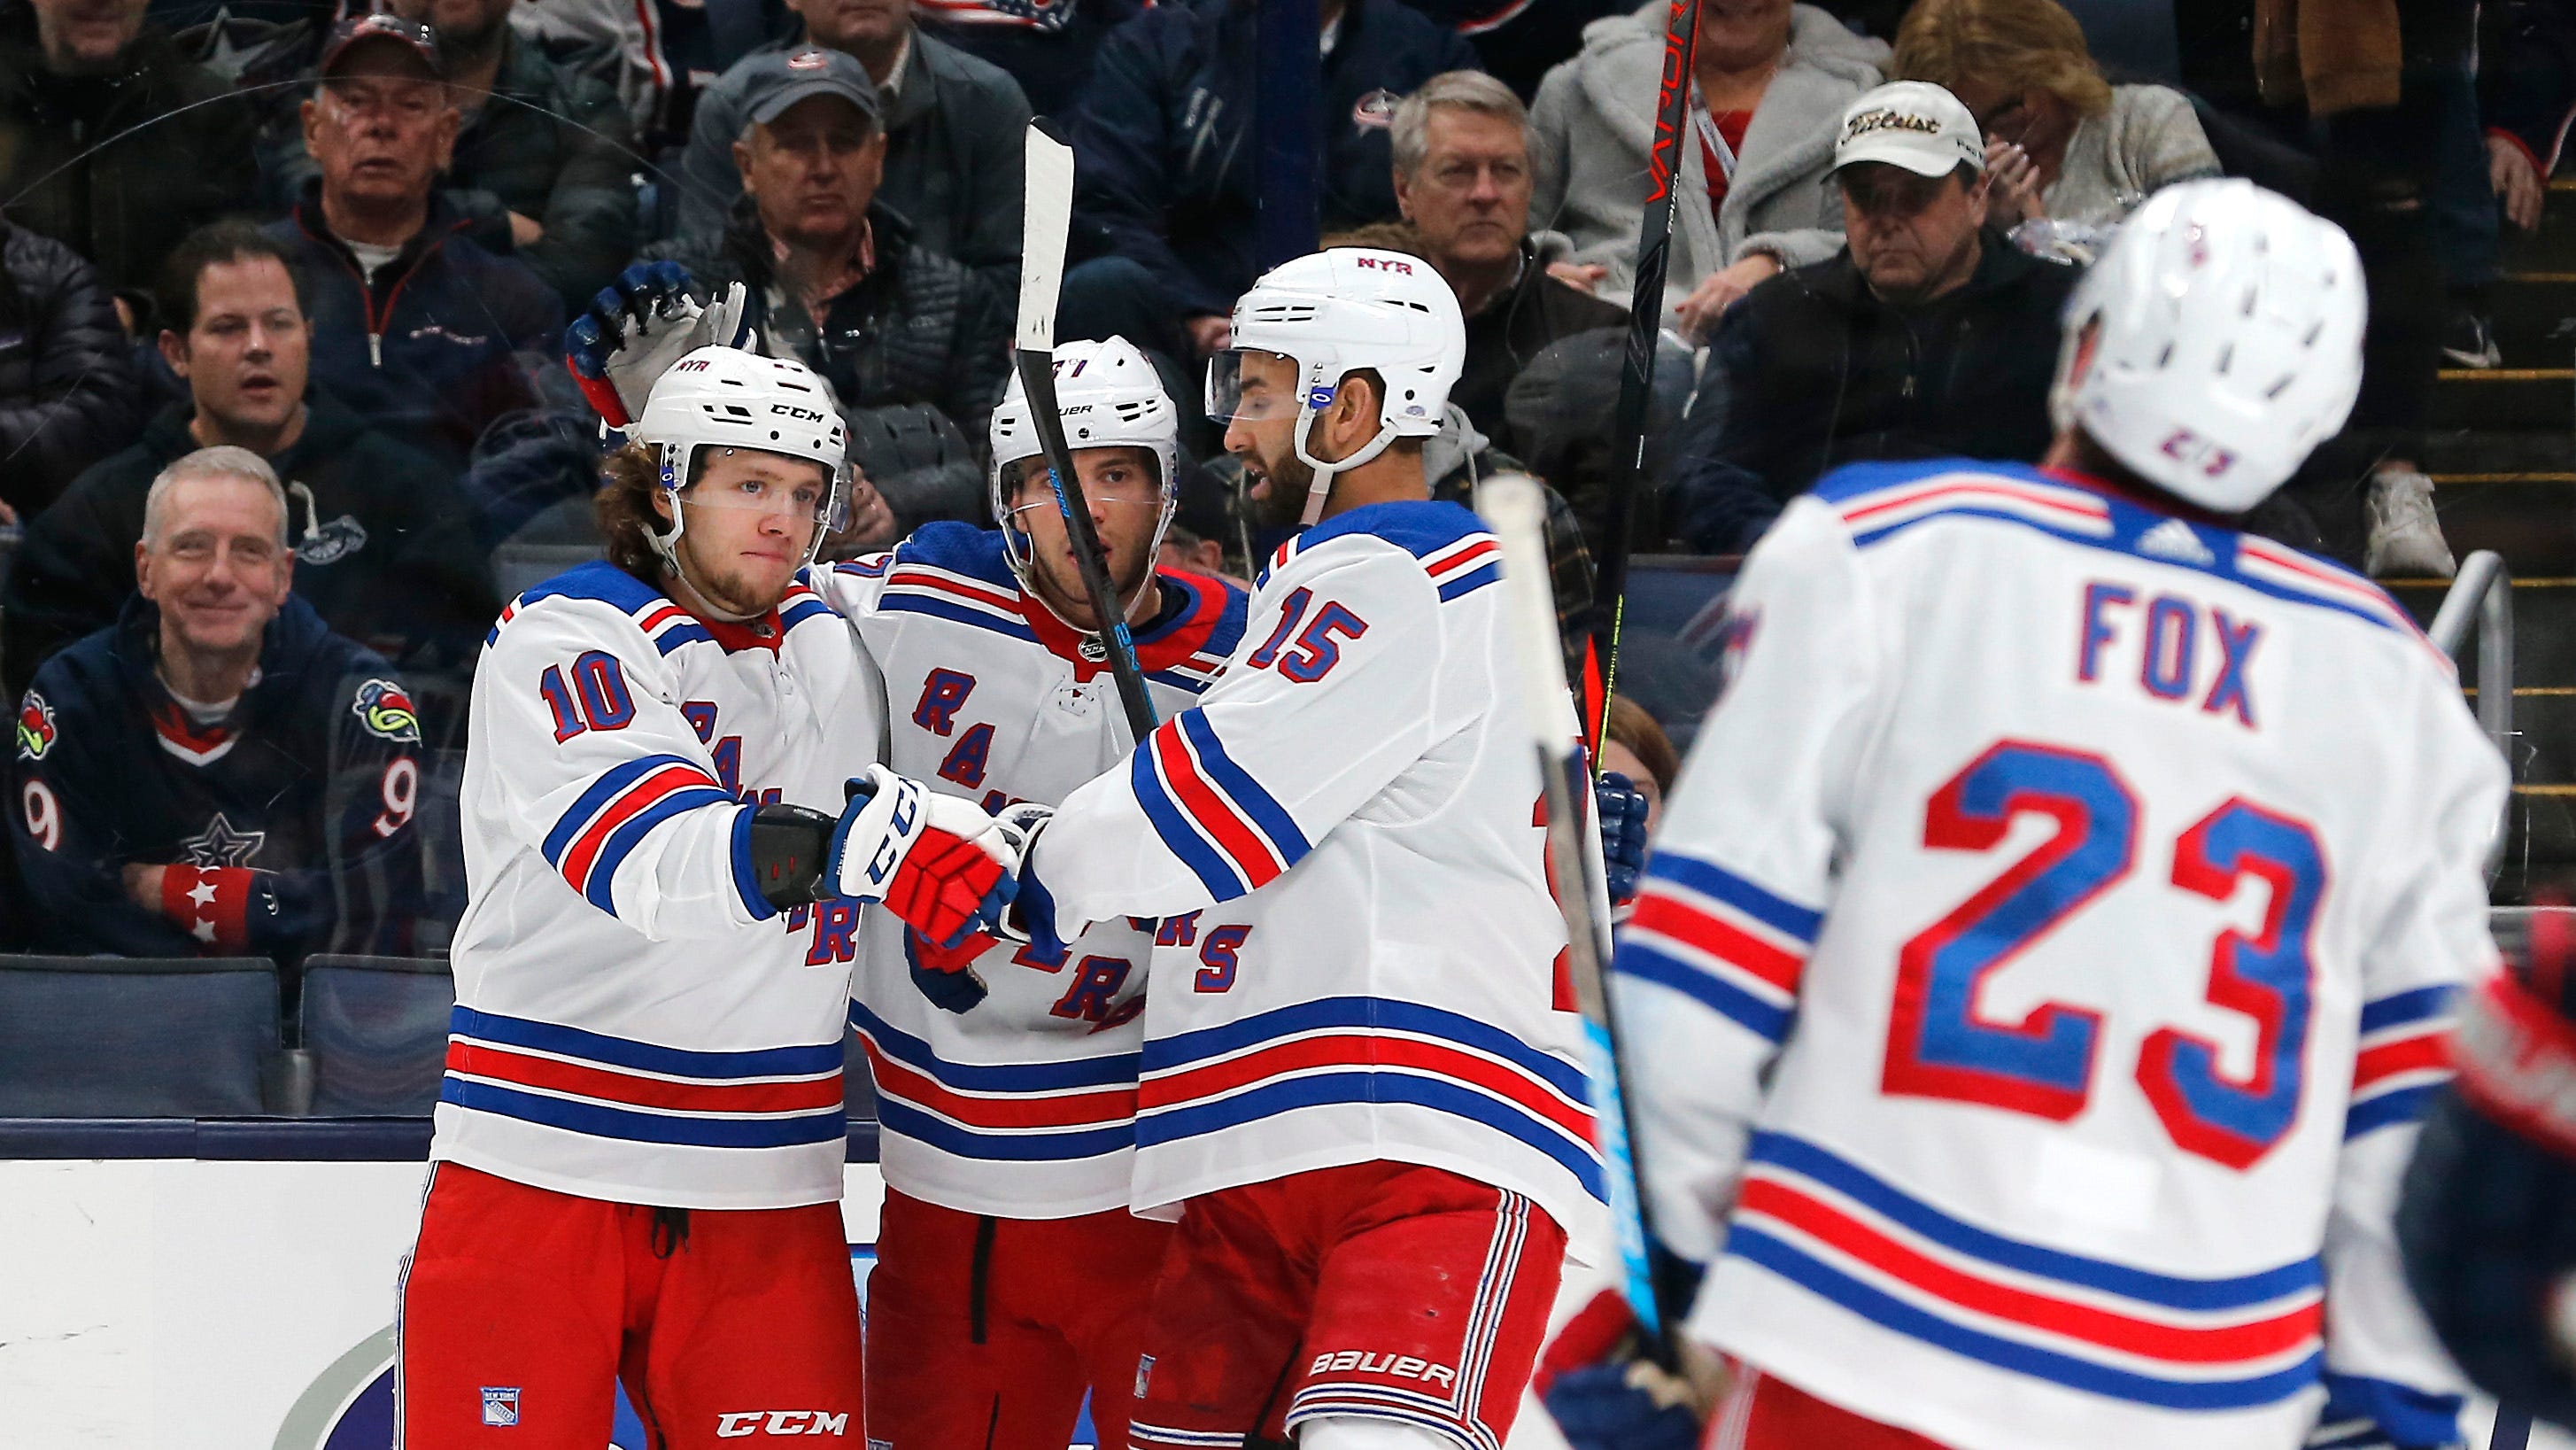 Artemi Panarin scores in his first trip to Columbus with NY Rangers